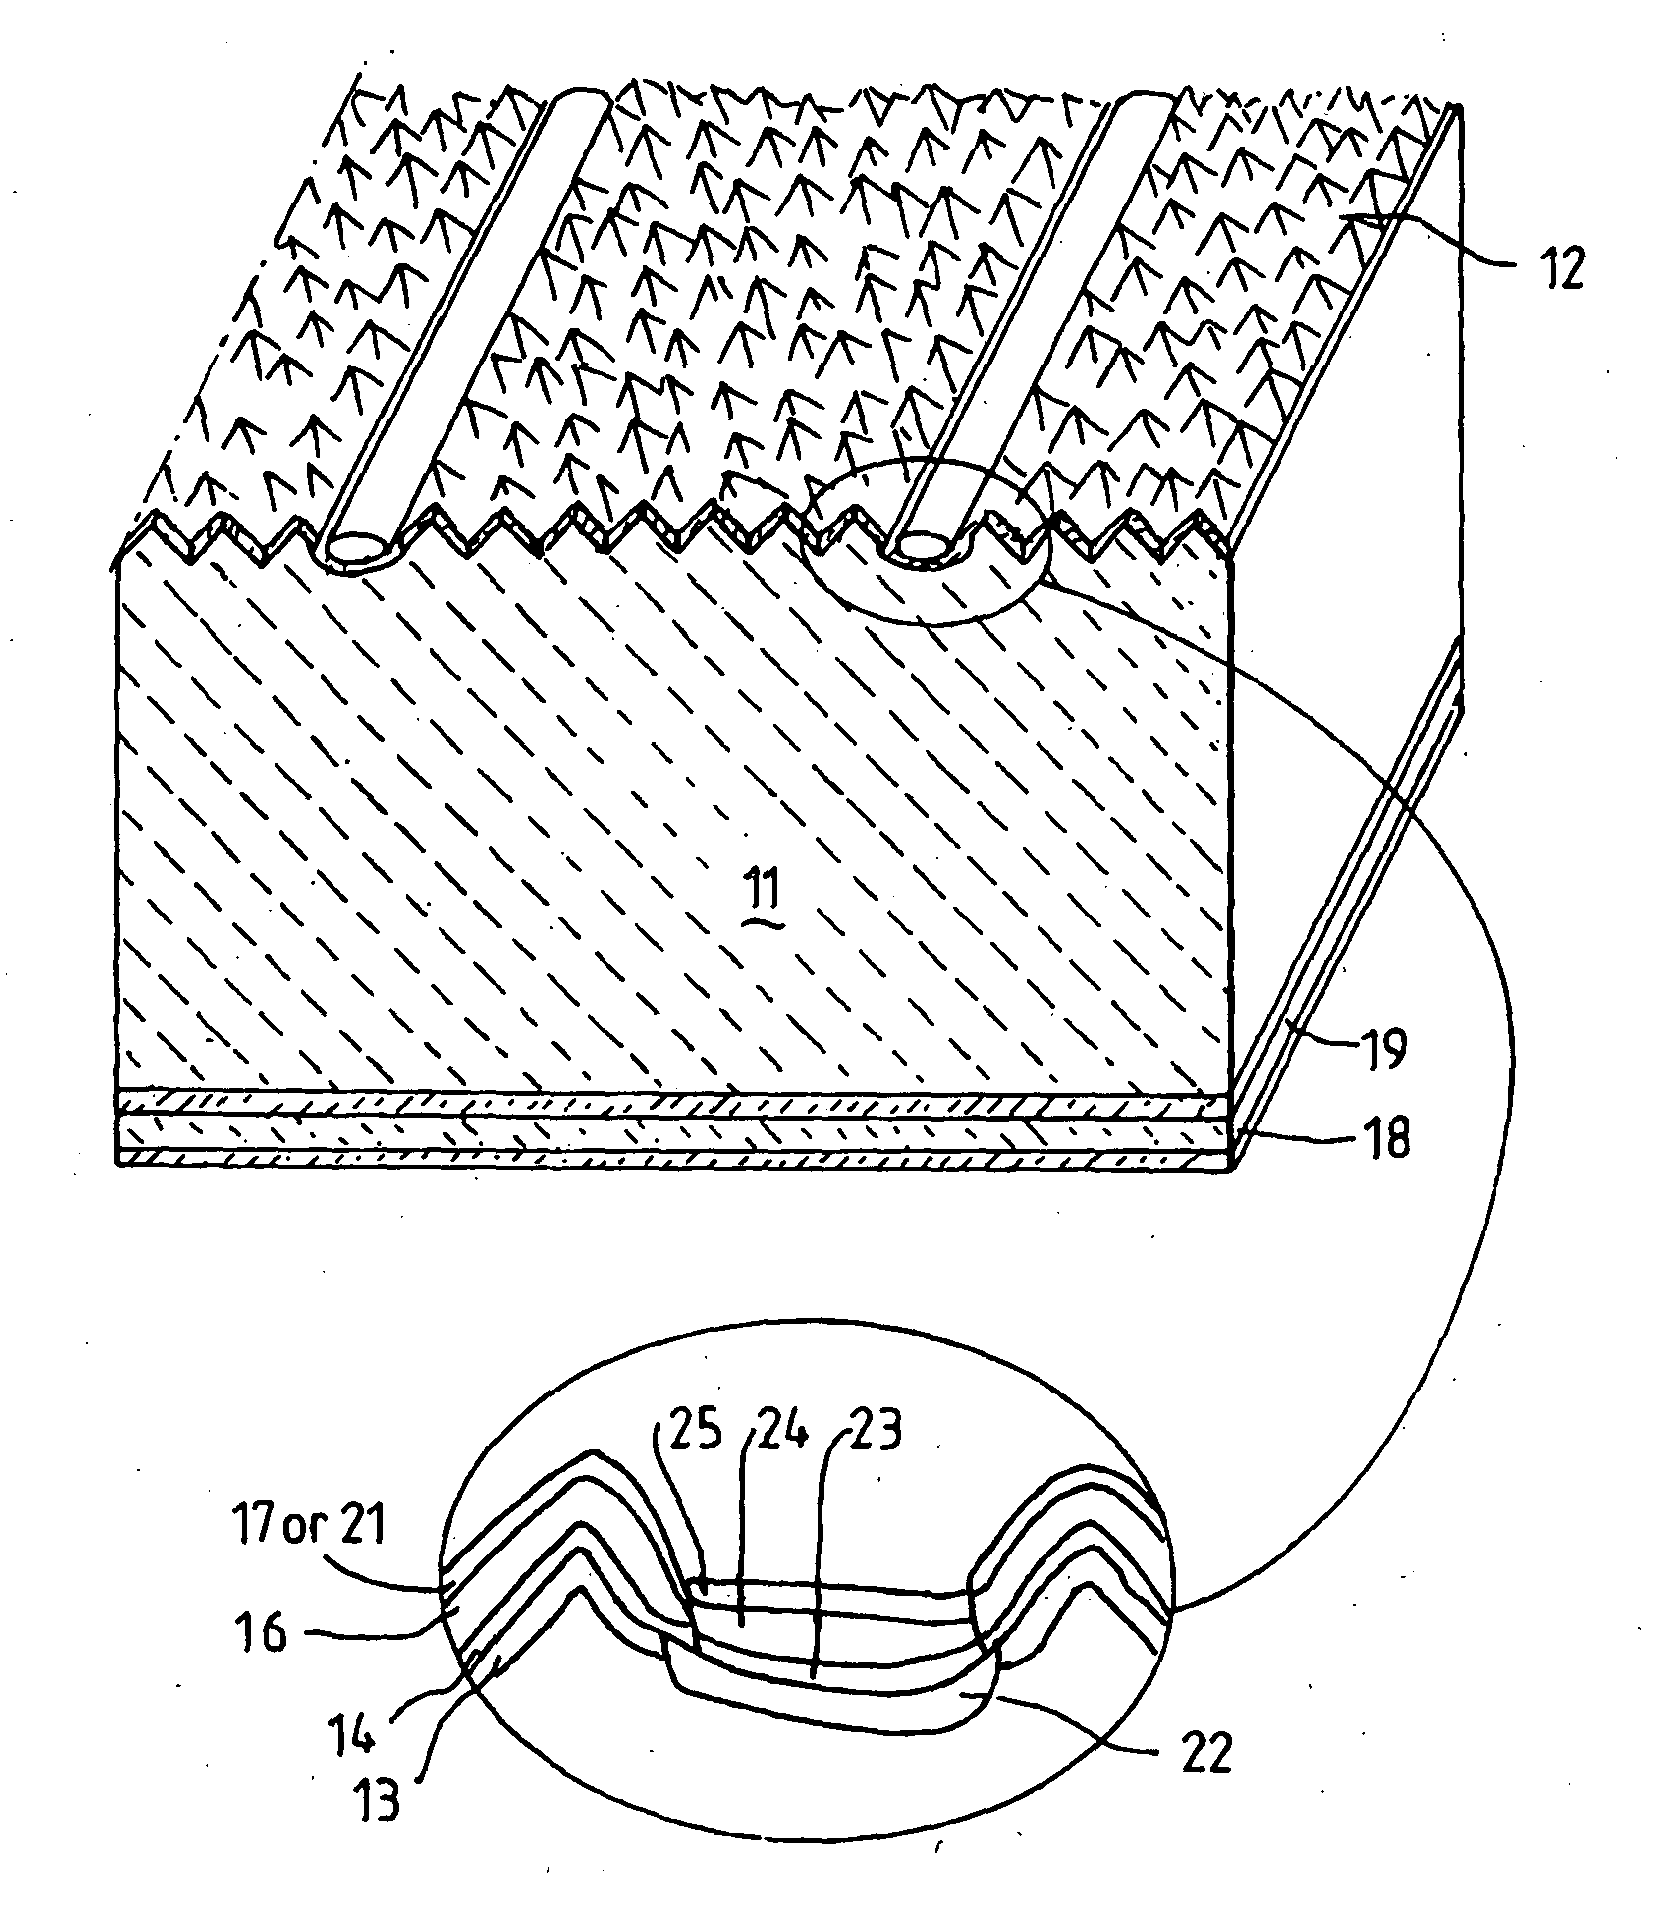 Photovoltaic device structure and method